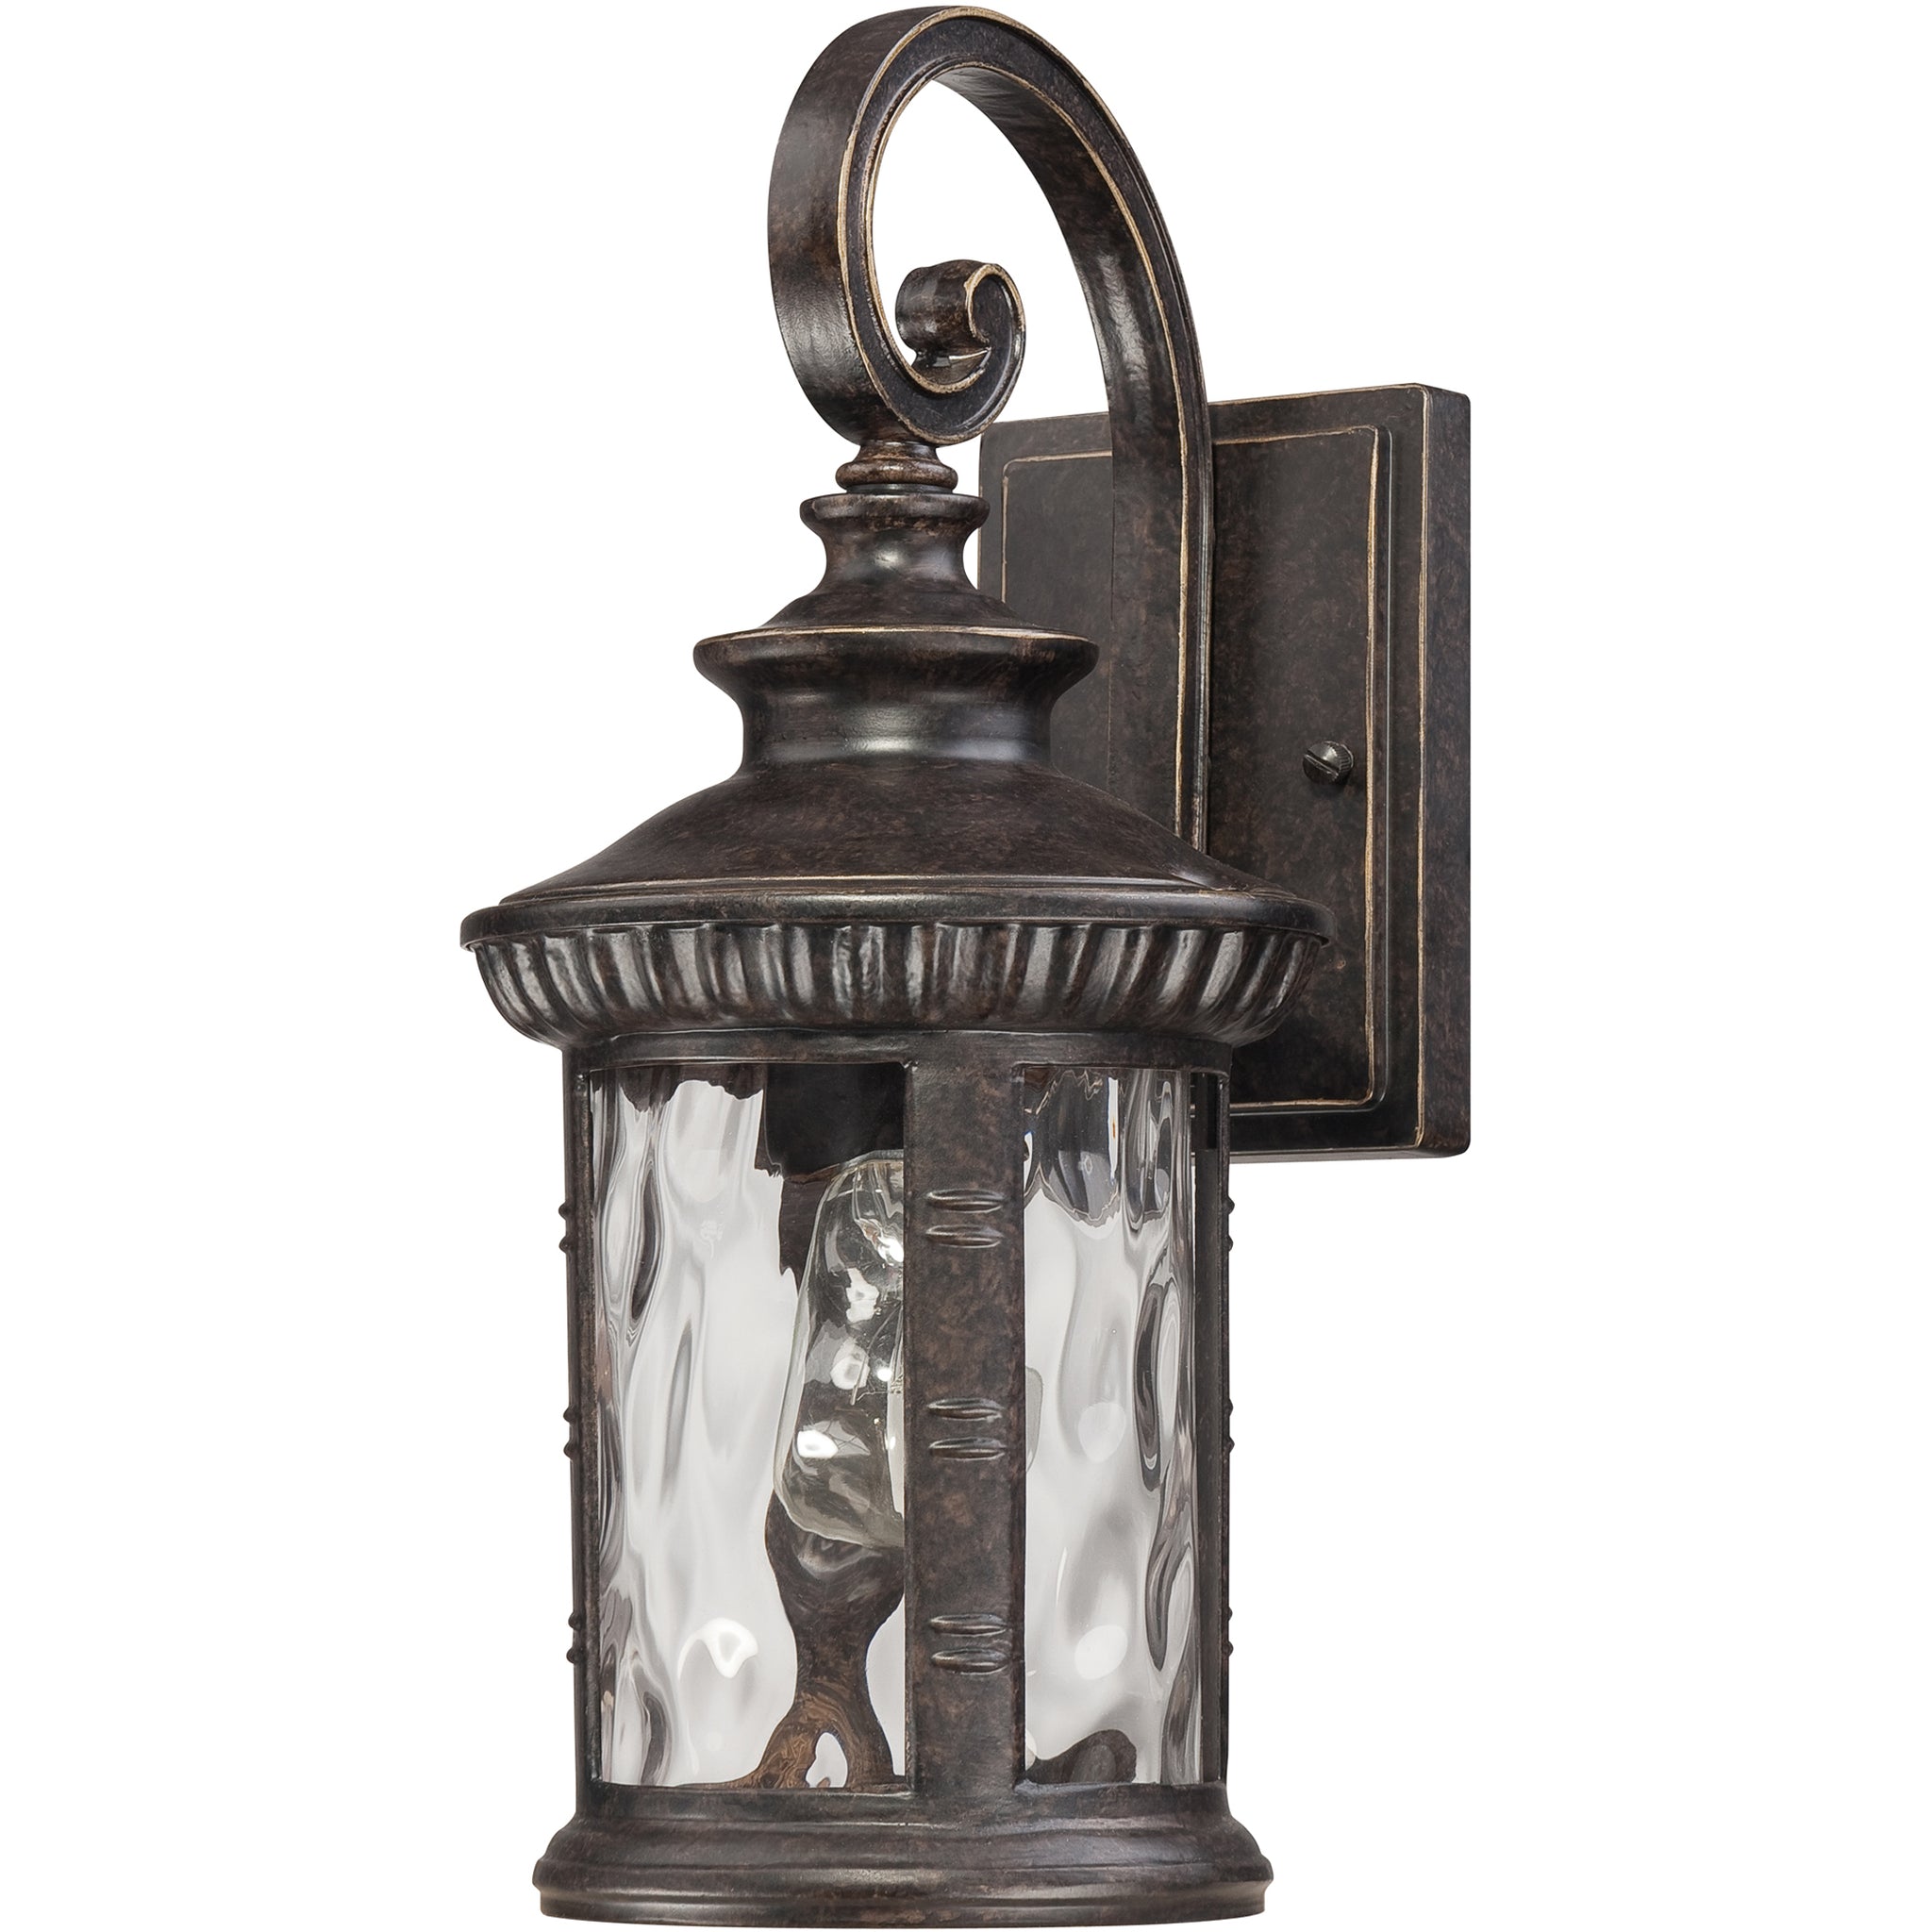 Chimera Outdoor Wall Light Imperial Bronze